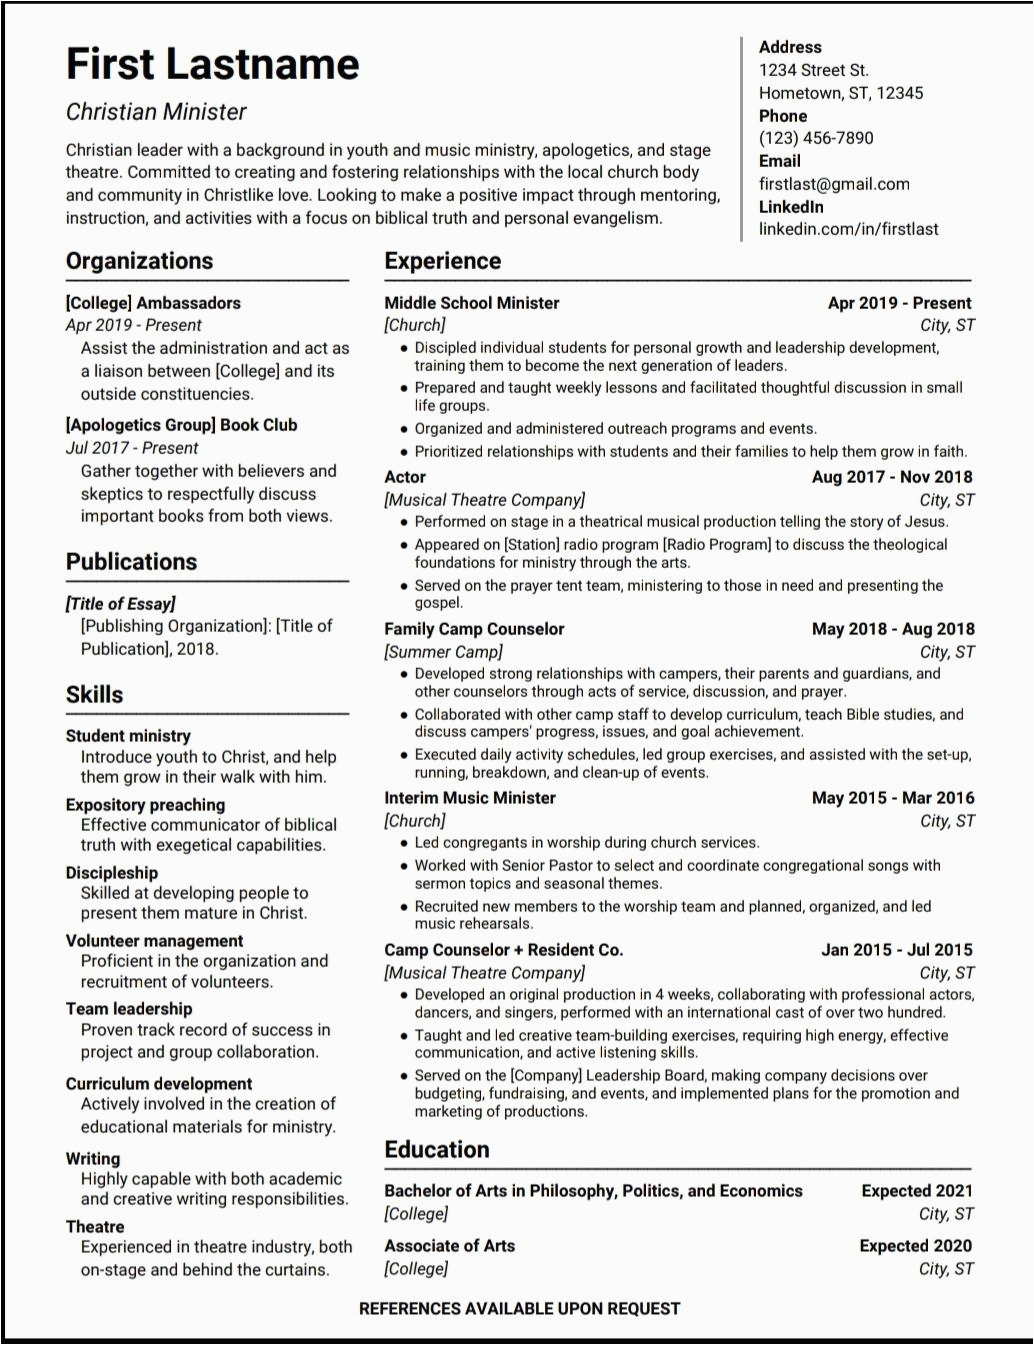 Sample Resume for A New Career Just Landed New Job with This Resume Super Happy with the format and